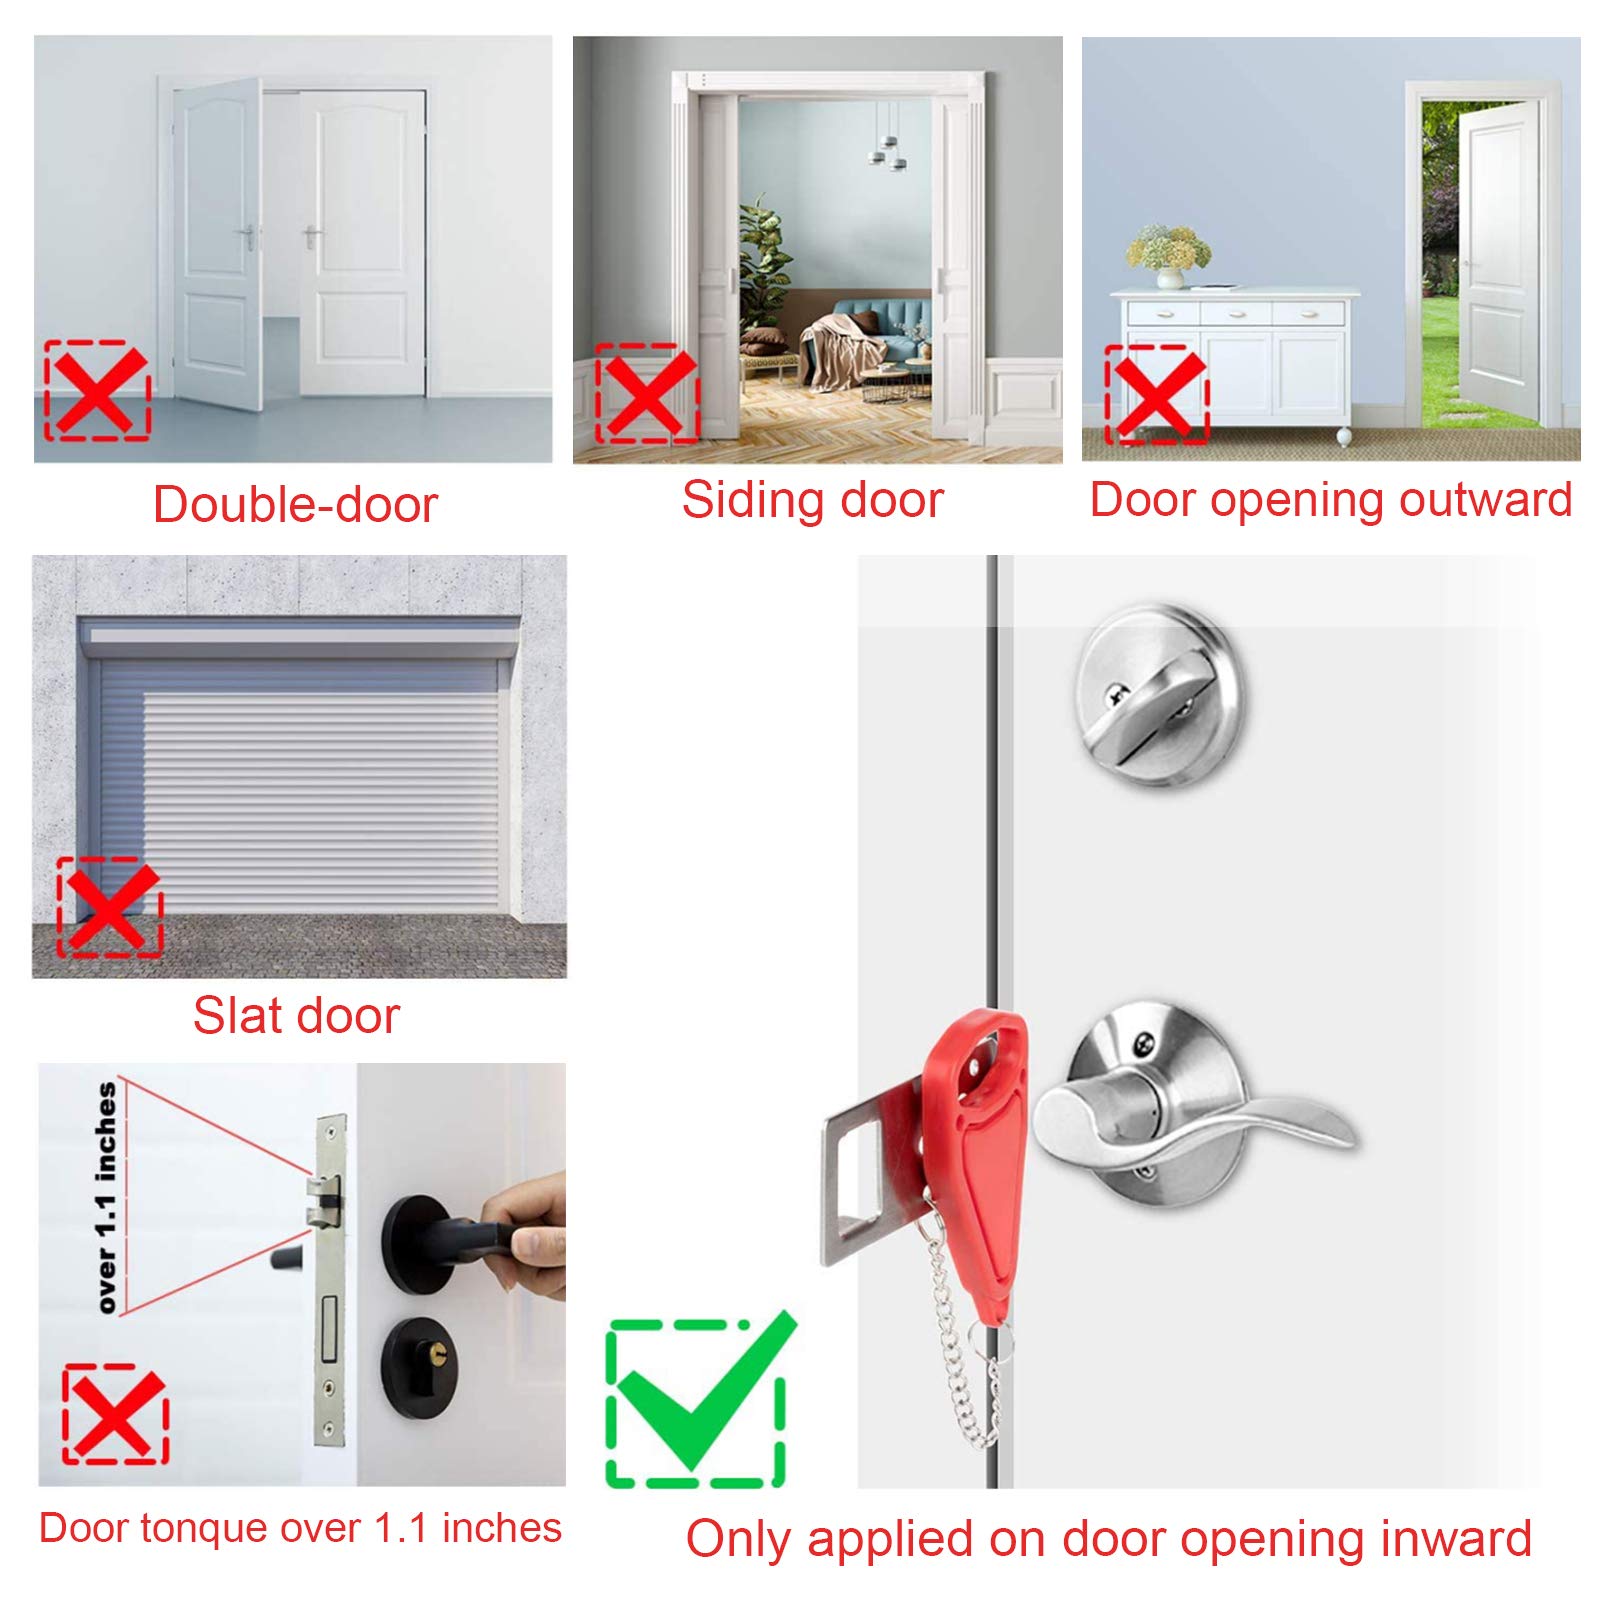 Portable Door Lock-2 Pack Solid Heavy Duty Extra Lock for Additional Privacy and Safety in Hotel,Apartment,and Prevent Unauthorized Entry in Traveling, AirBNB, Apartment and College